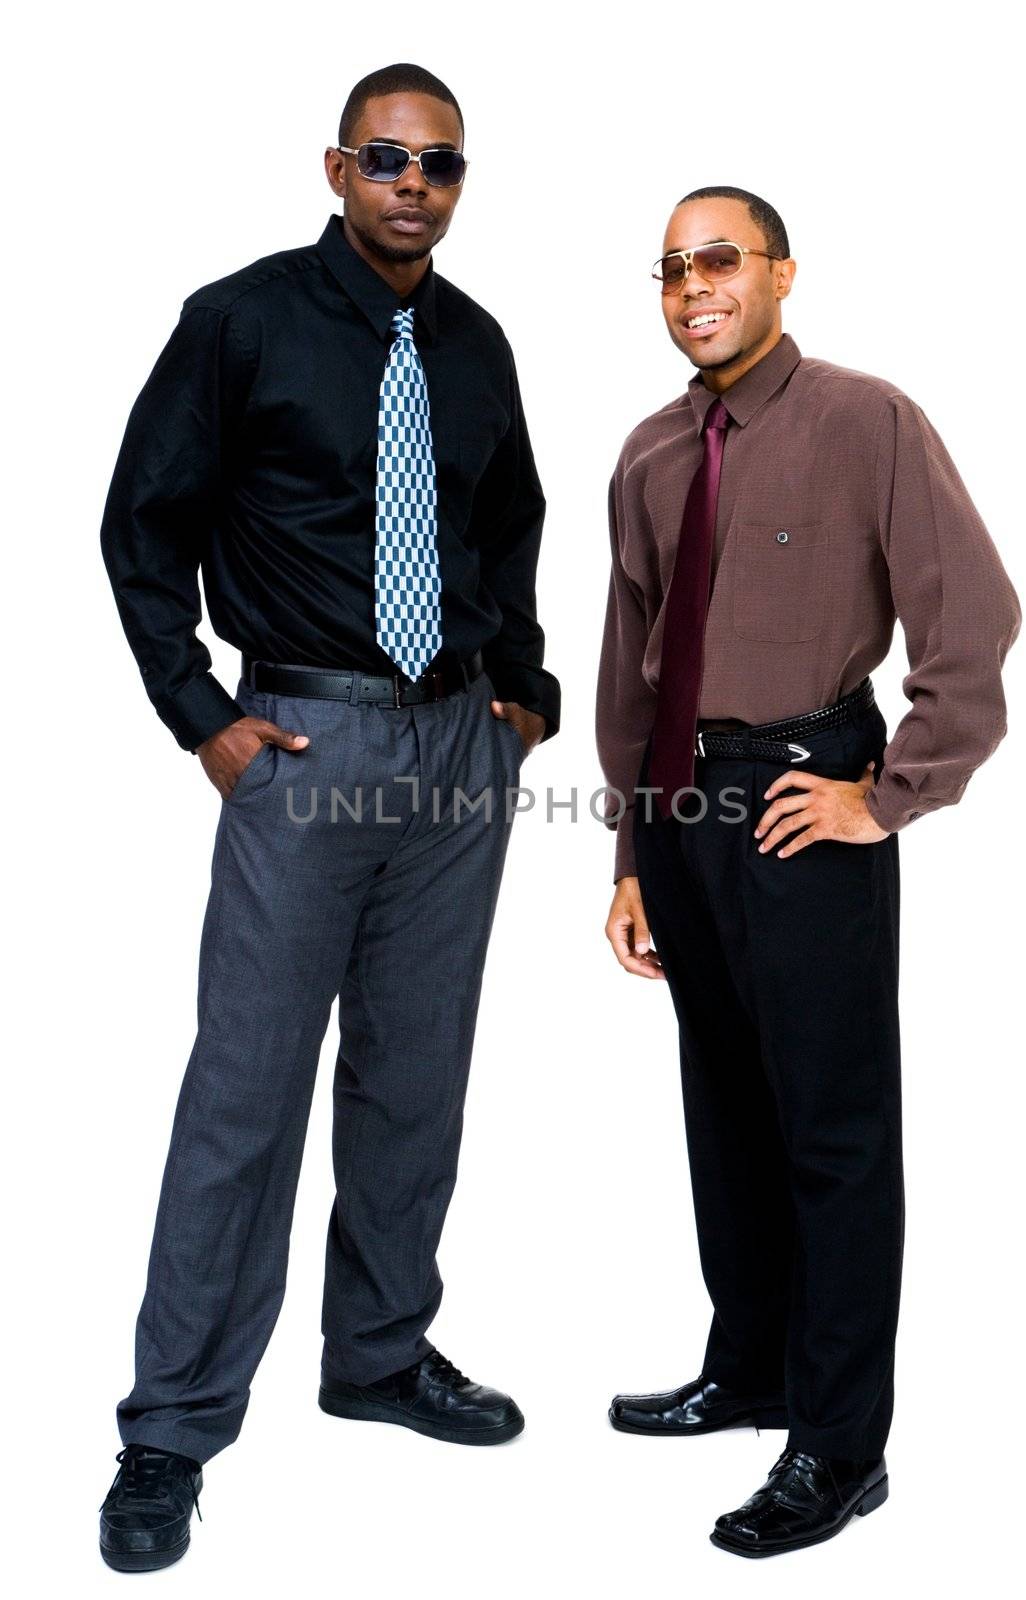 Smiling businessmen posing together isolated over white